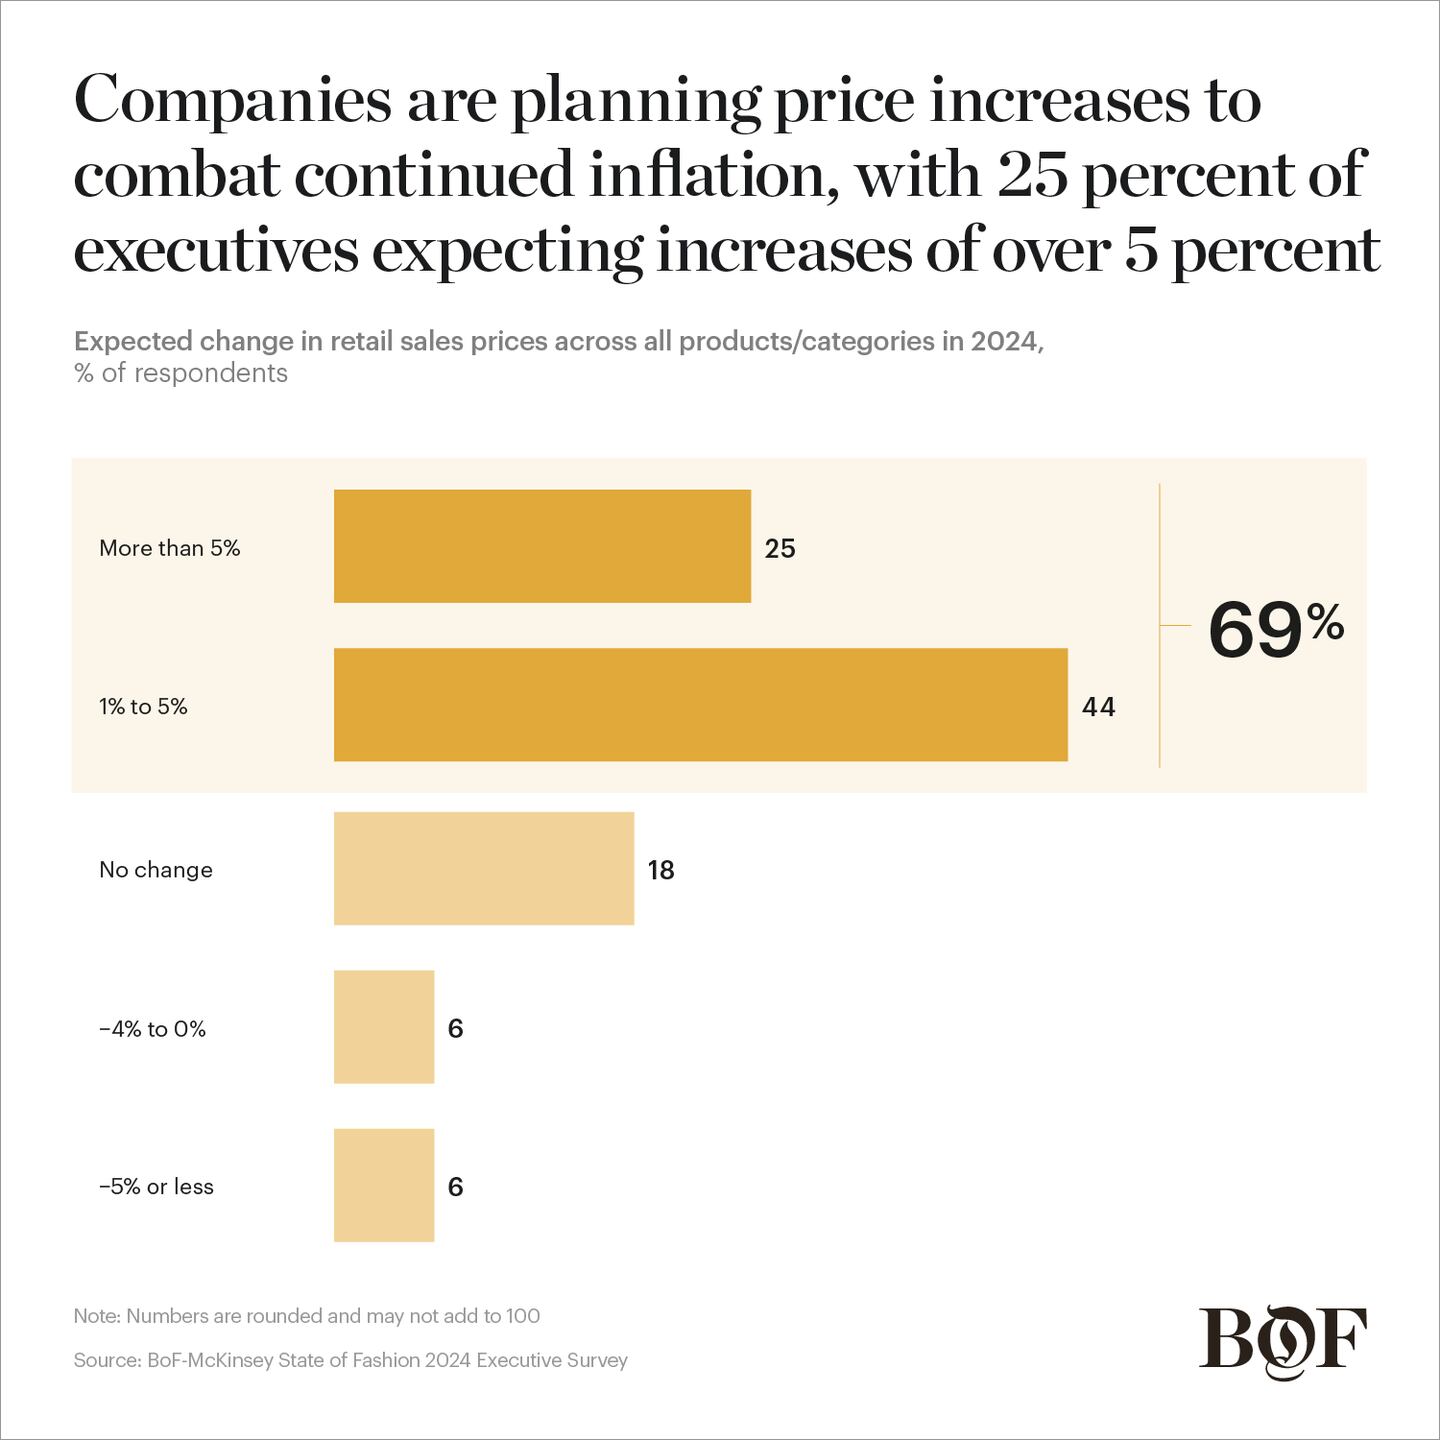 Bar chart showing planned price increases by company executives